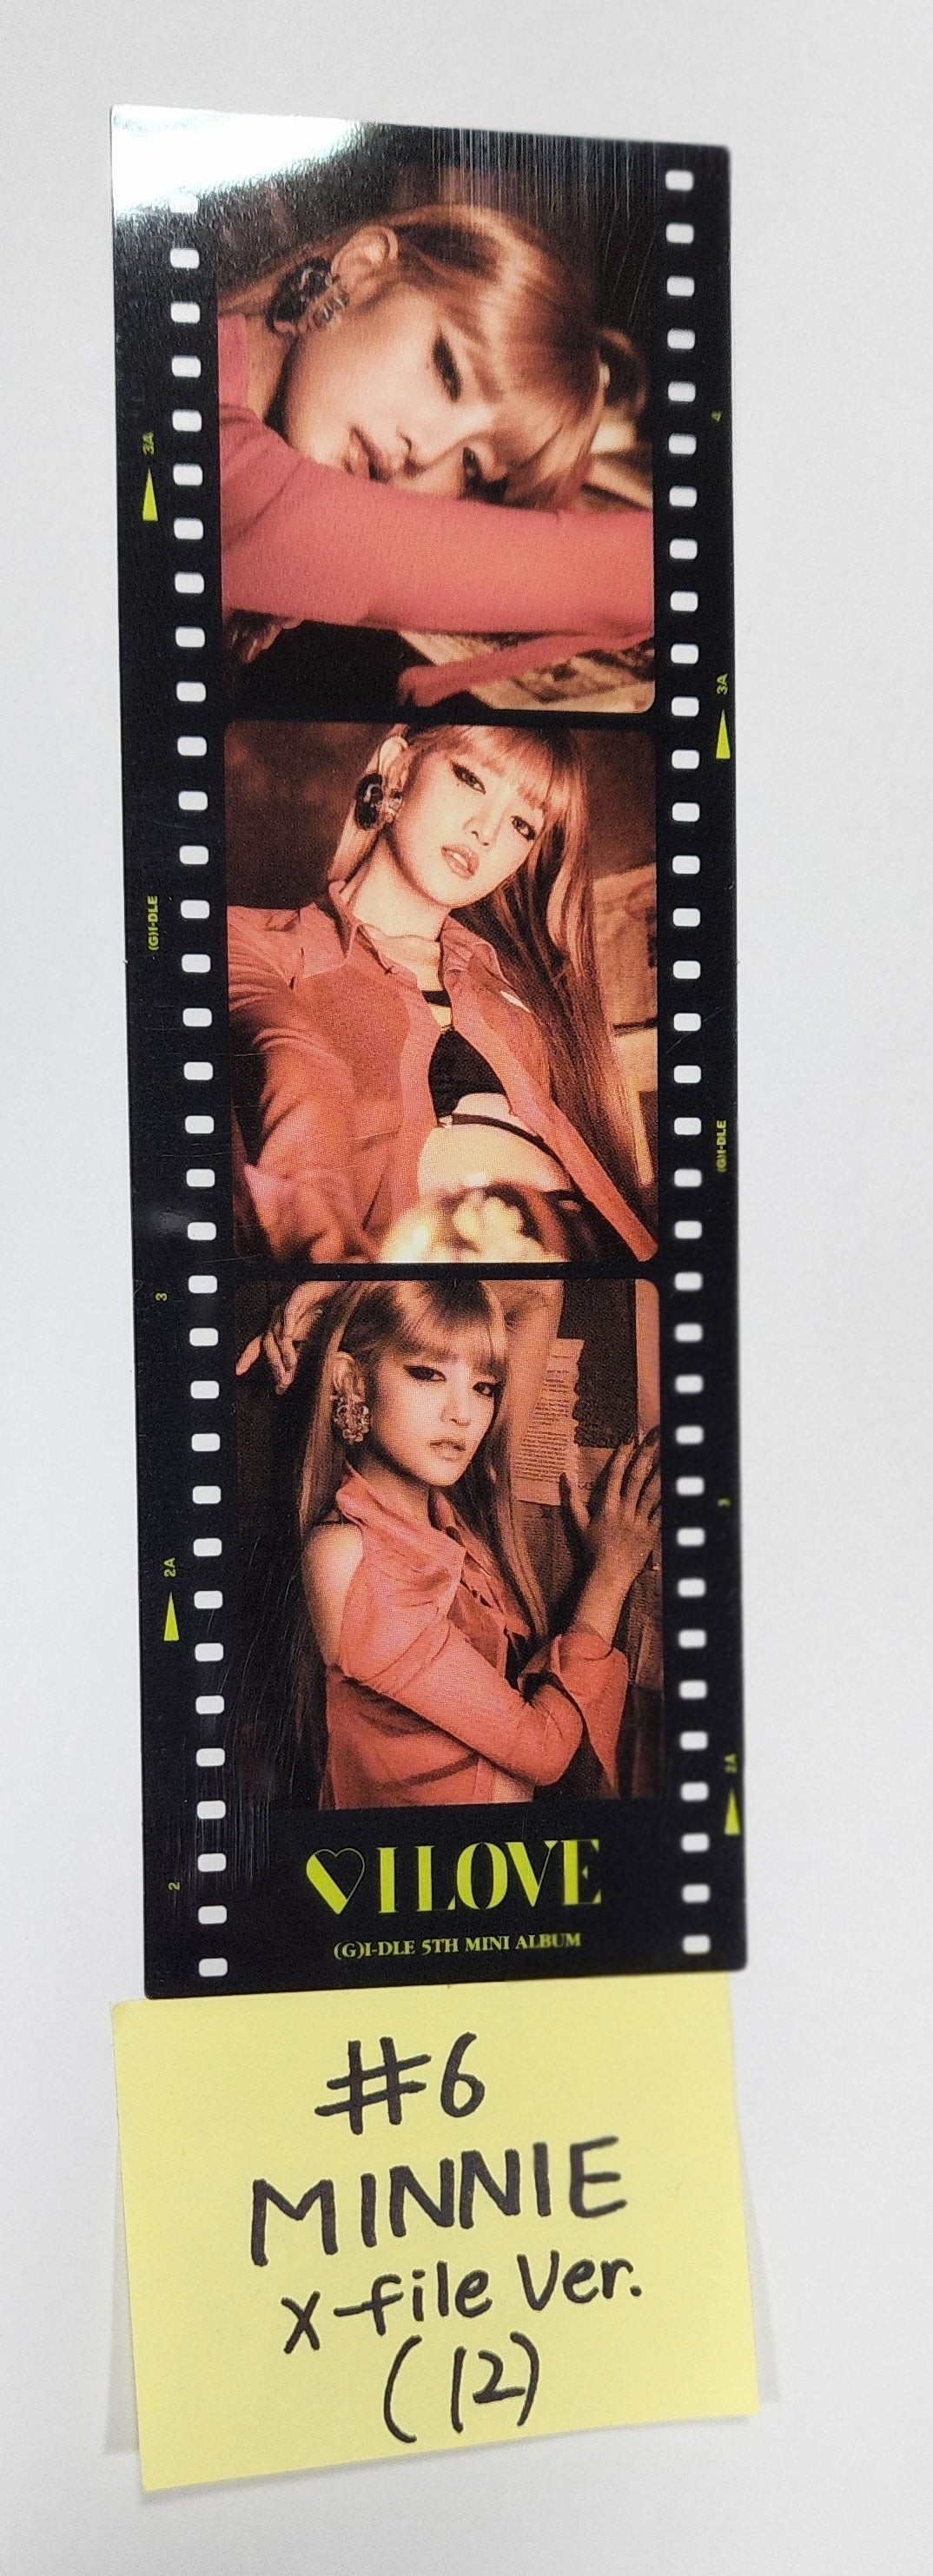 (g) I-DLE "I LOVE" - Official Bookmark, Mini Poster